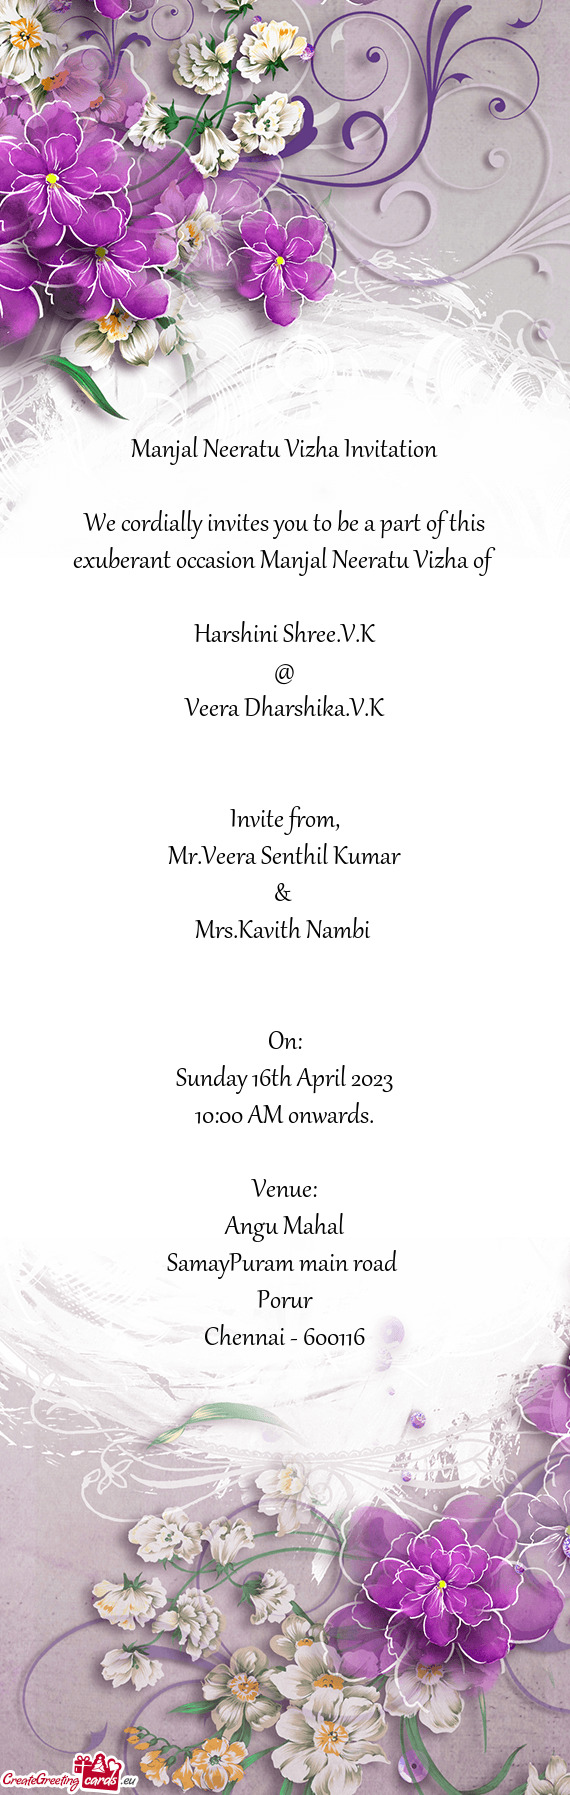 We cordially invites you to be a part of this exuberant occasion Manjal Neeratu Vizha of